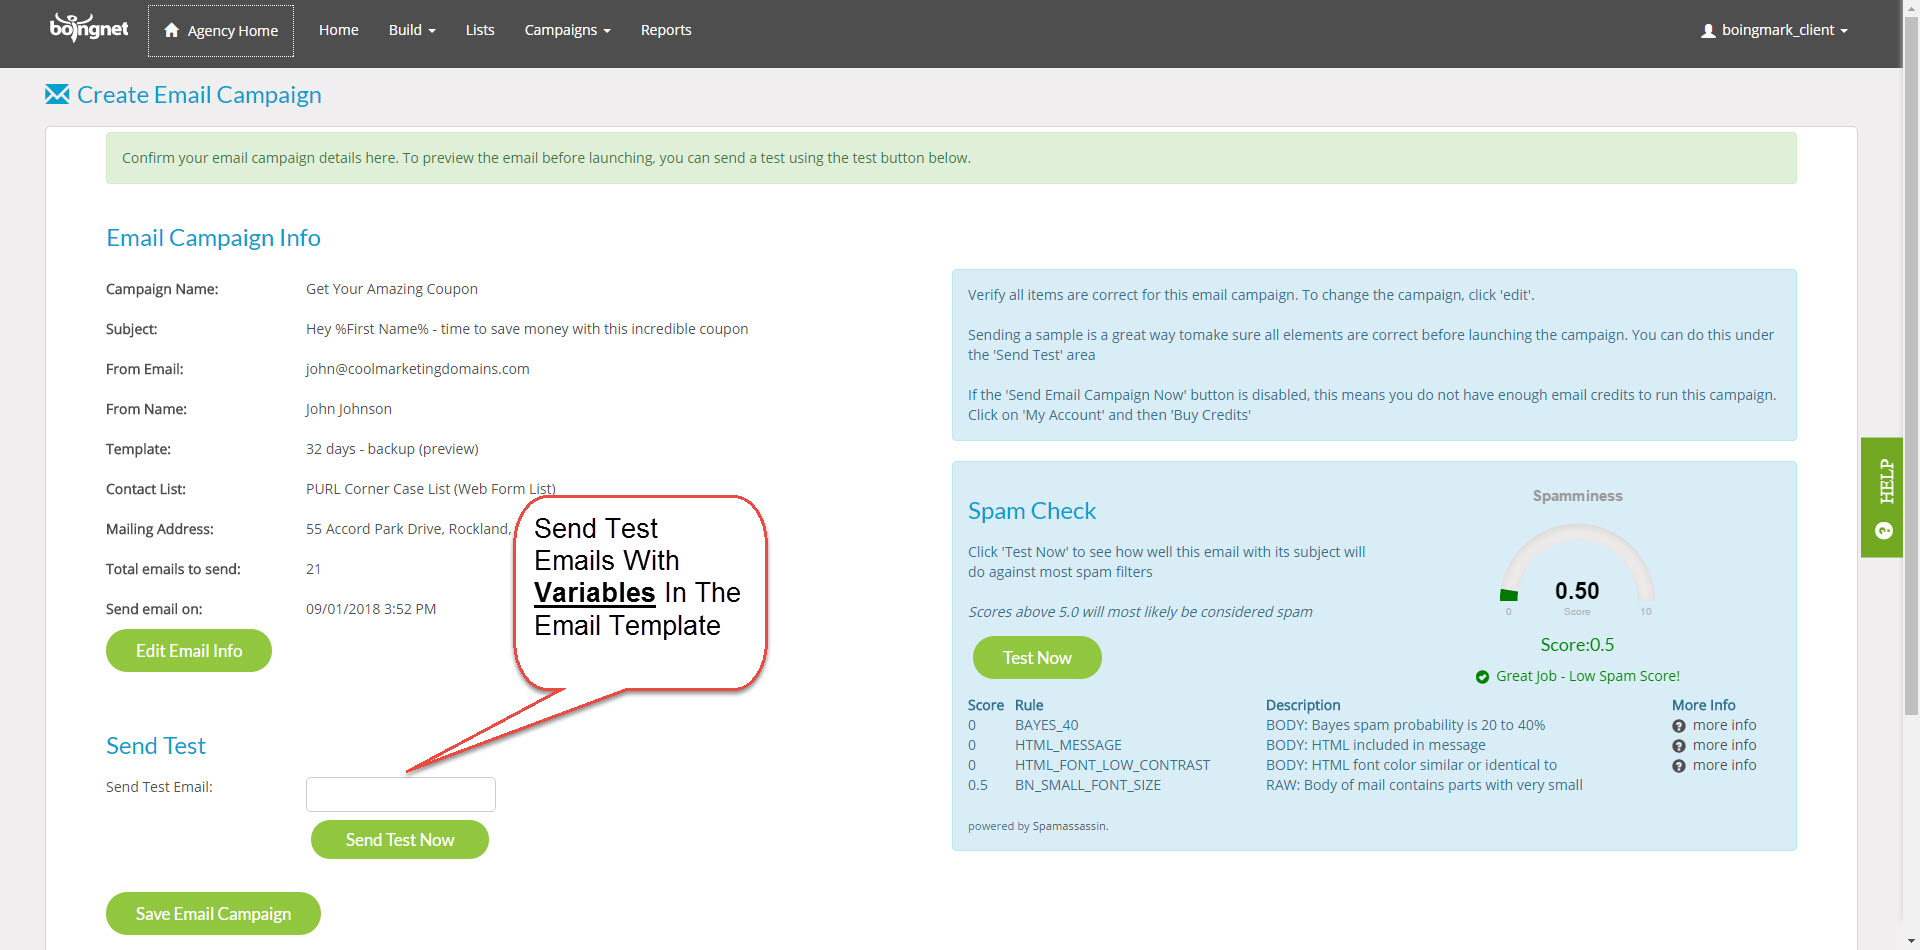 New reporting tools release - test email variables